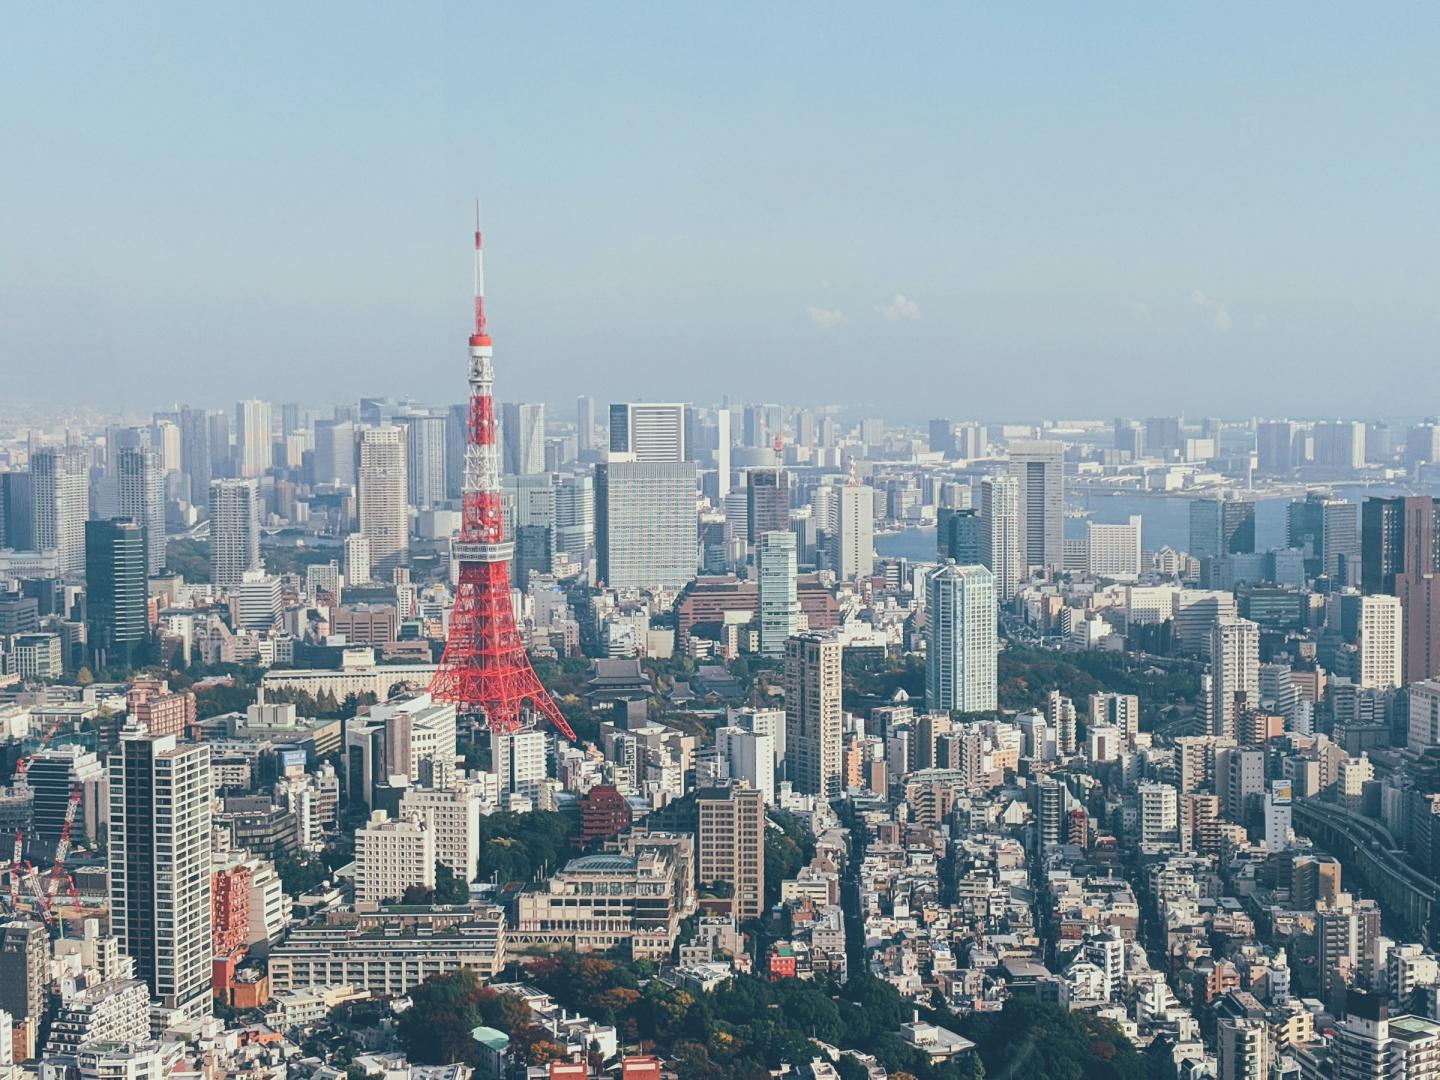 Tokyo Tower and the city of Tokyo